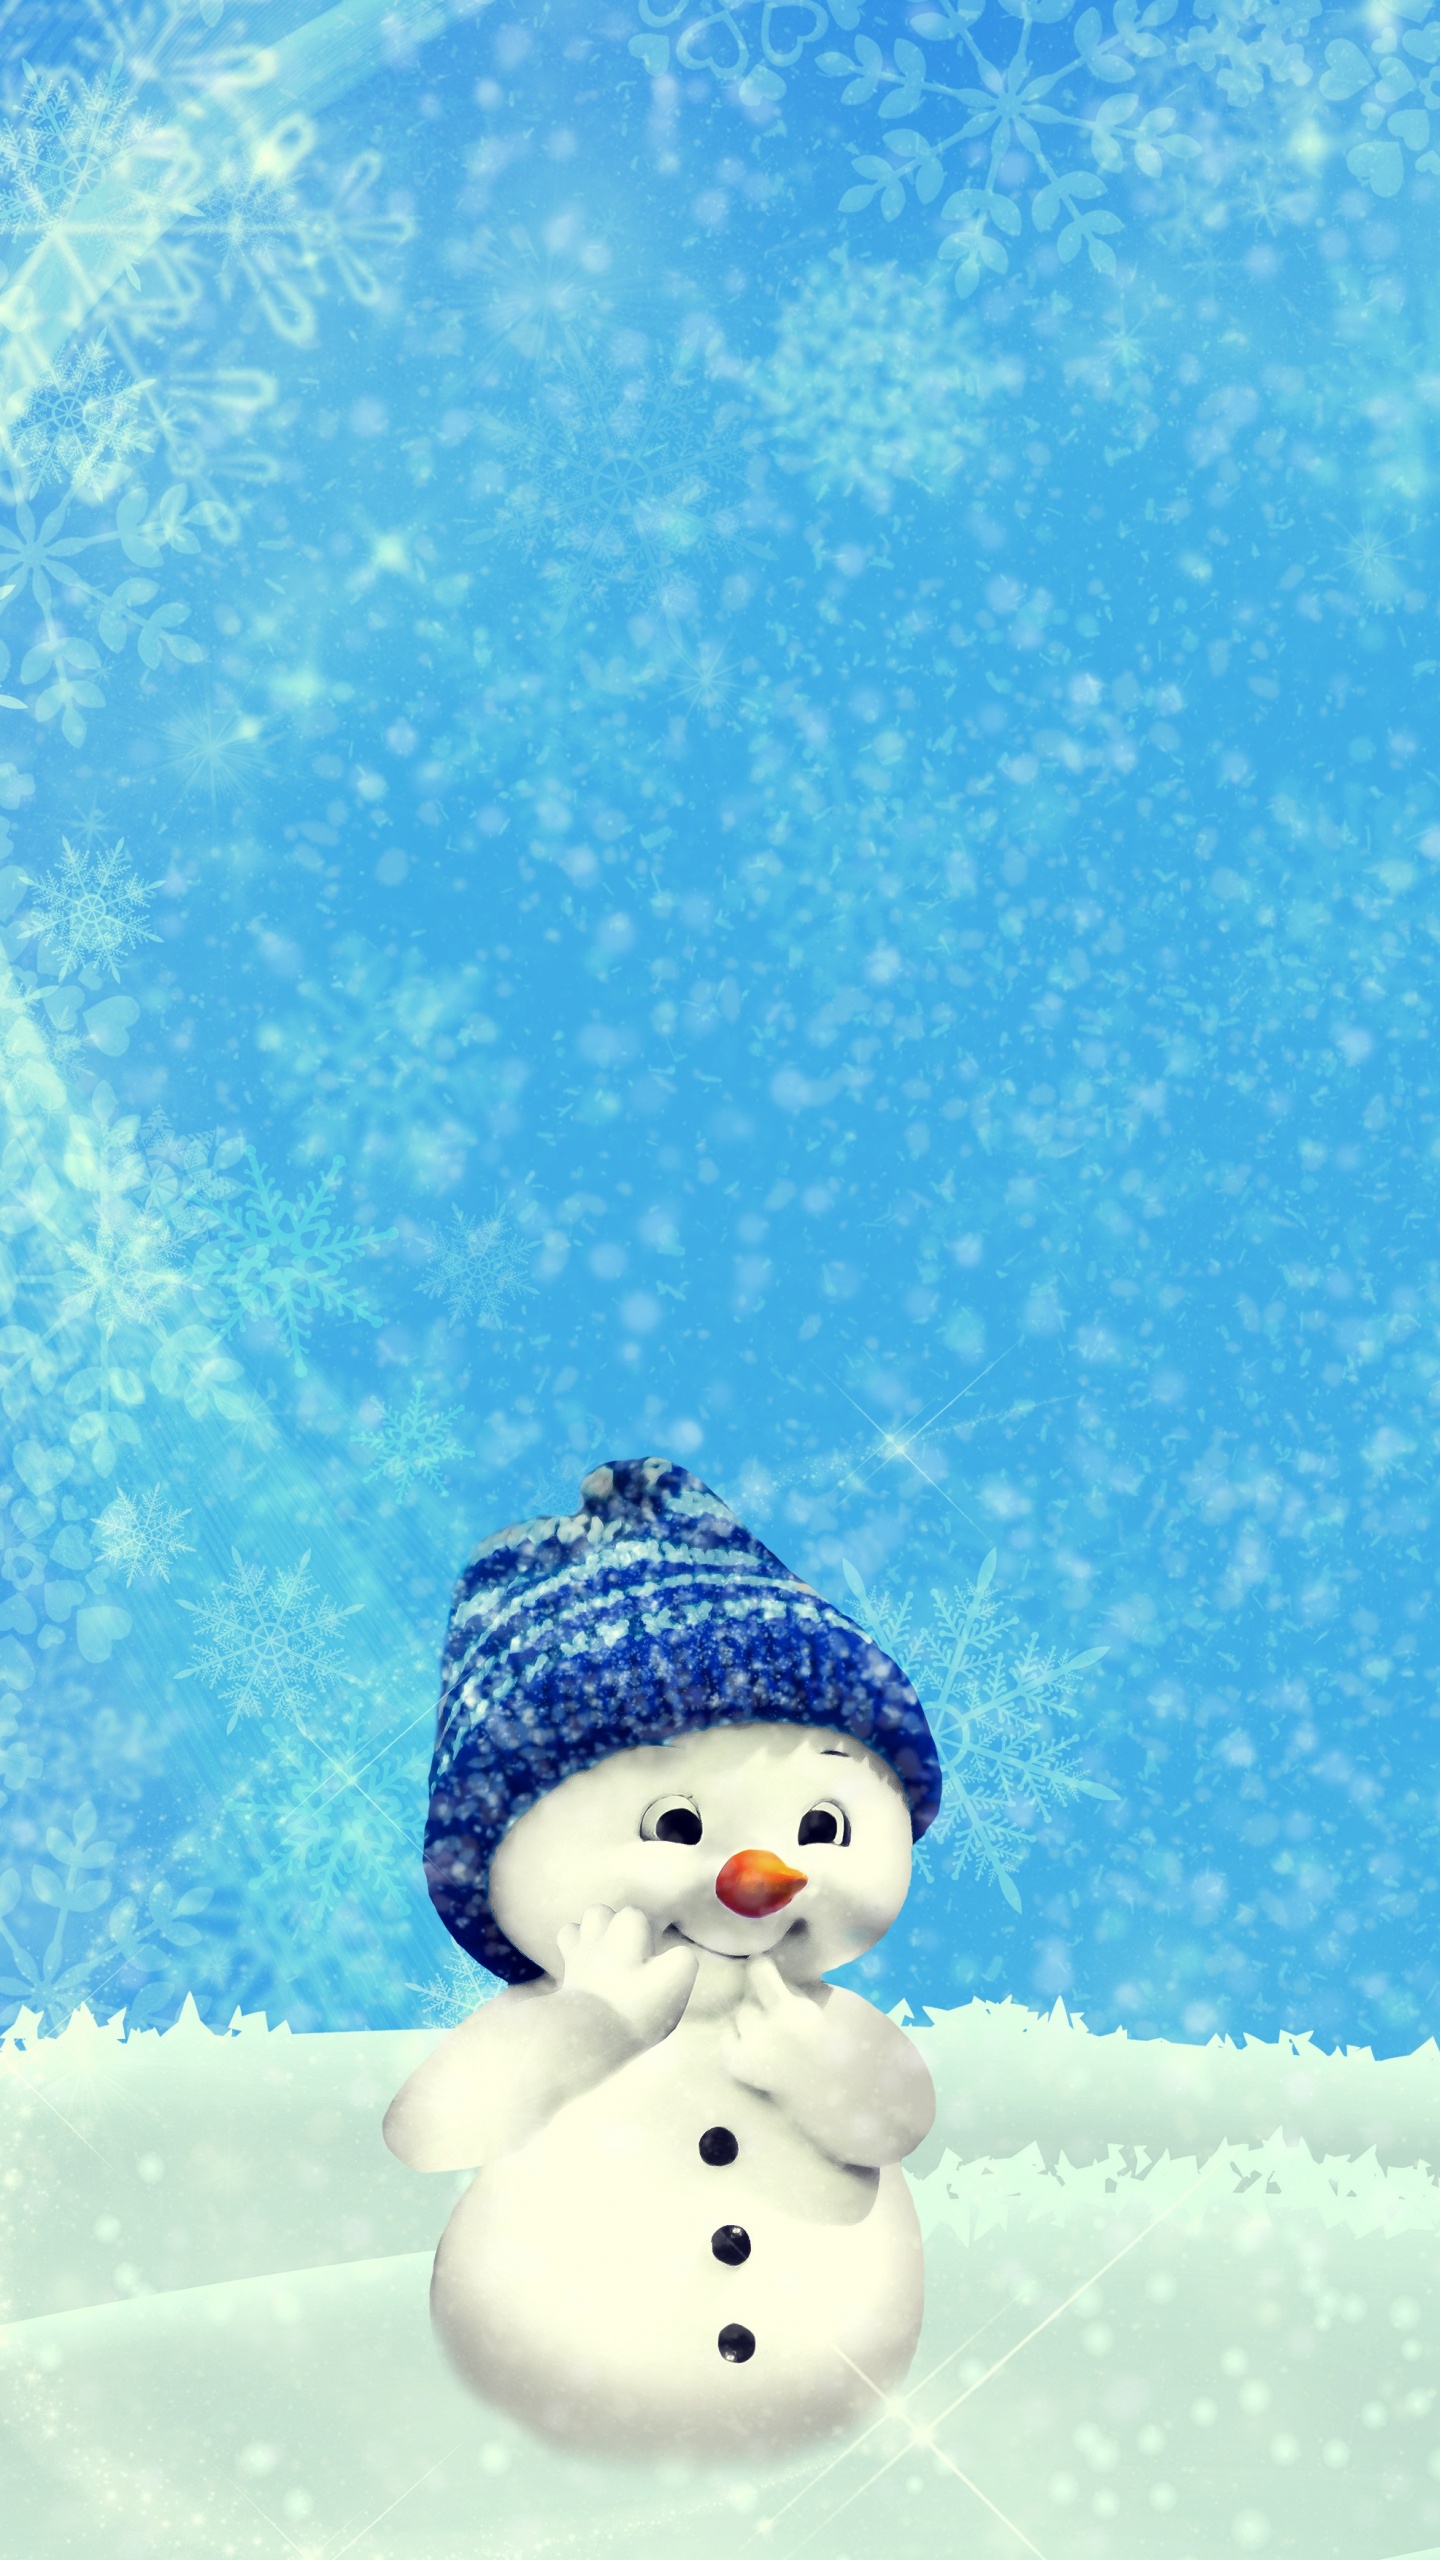 Snowman, Christmas Day, Snow, Winter, Freezing. Wallpaper in 1440x2560 Resolution